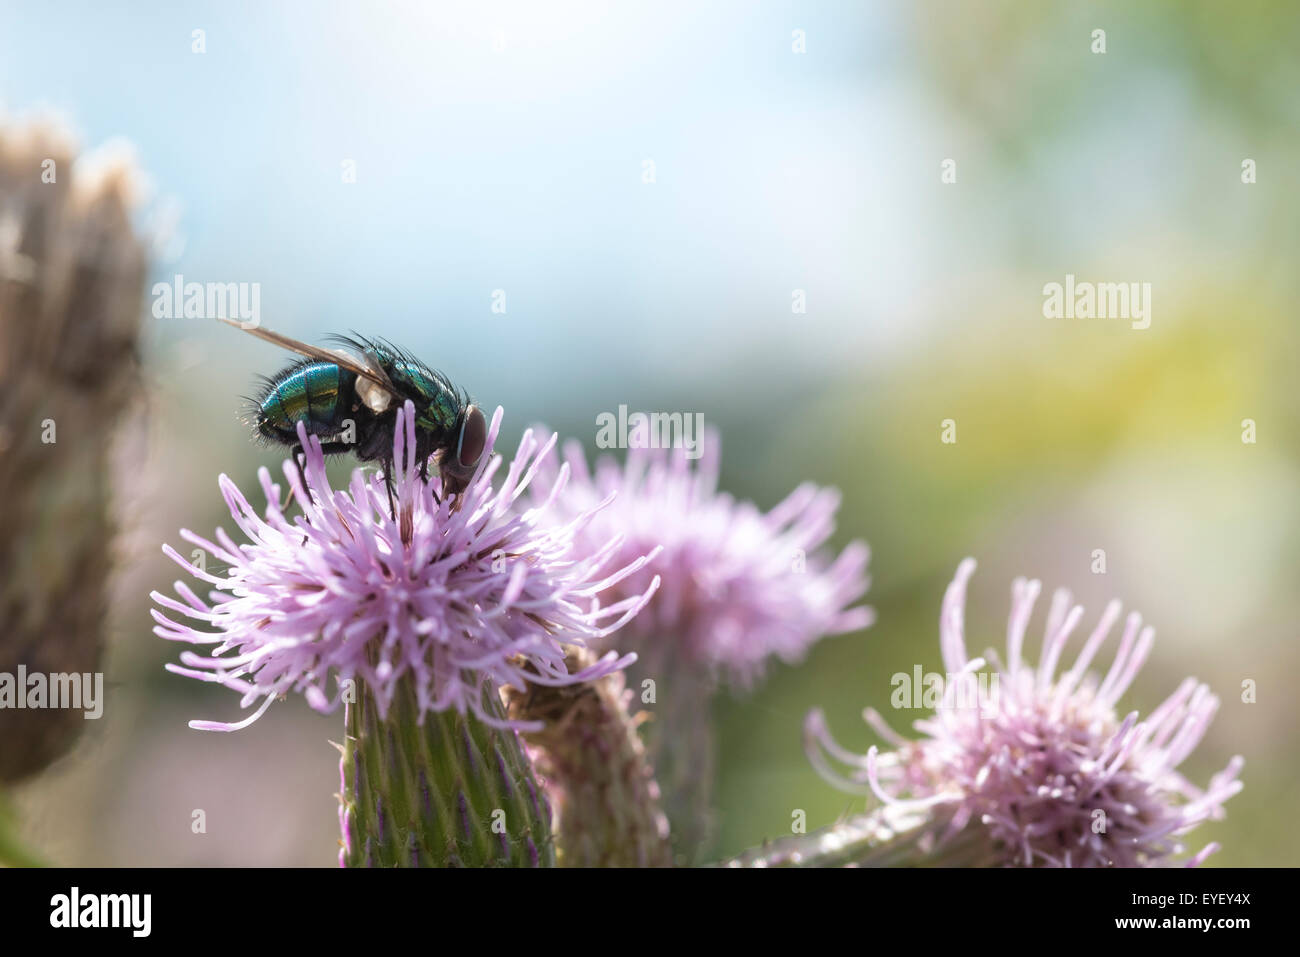 A Green Bottle blow fly feeding on a thistle flower Stock Photo